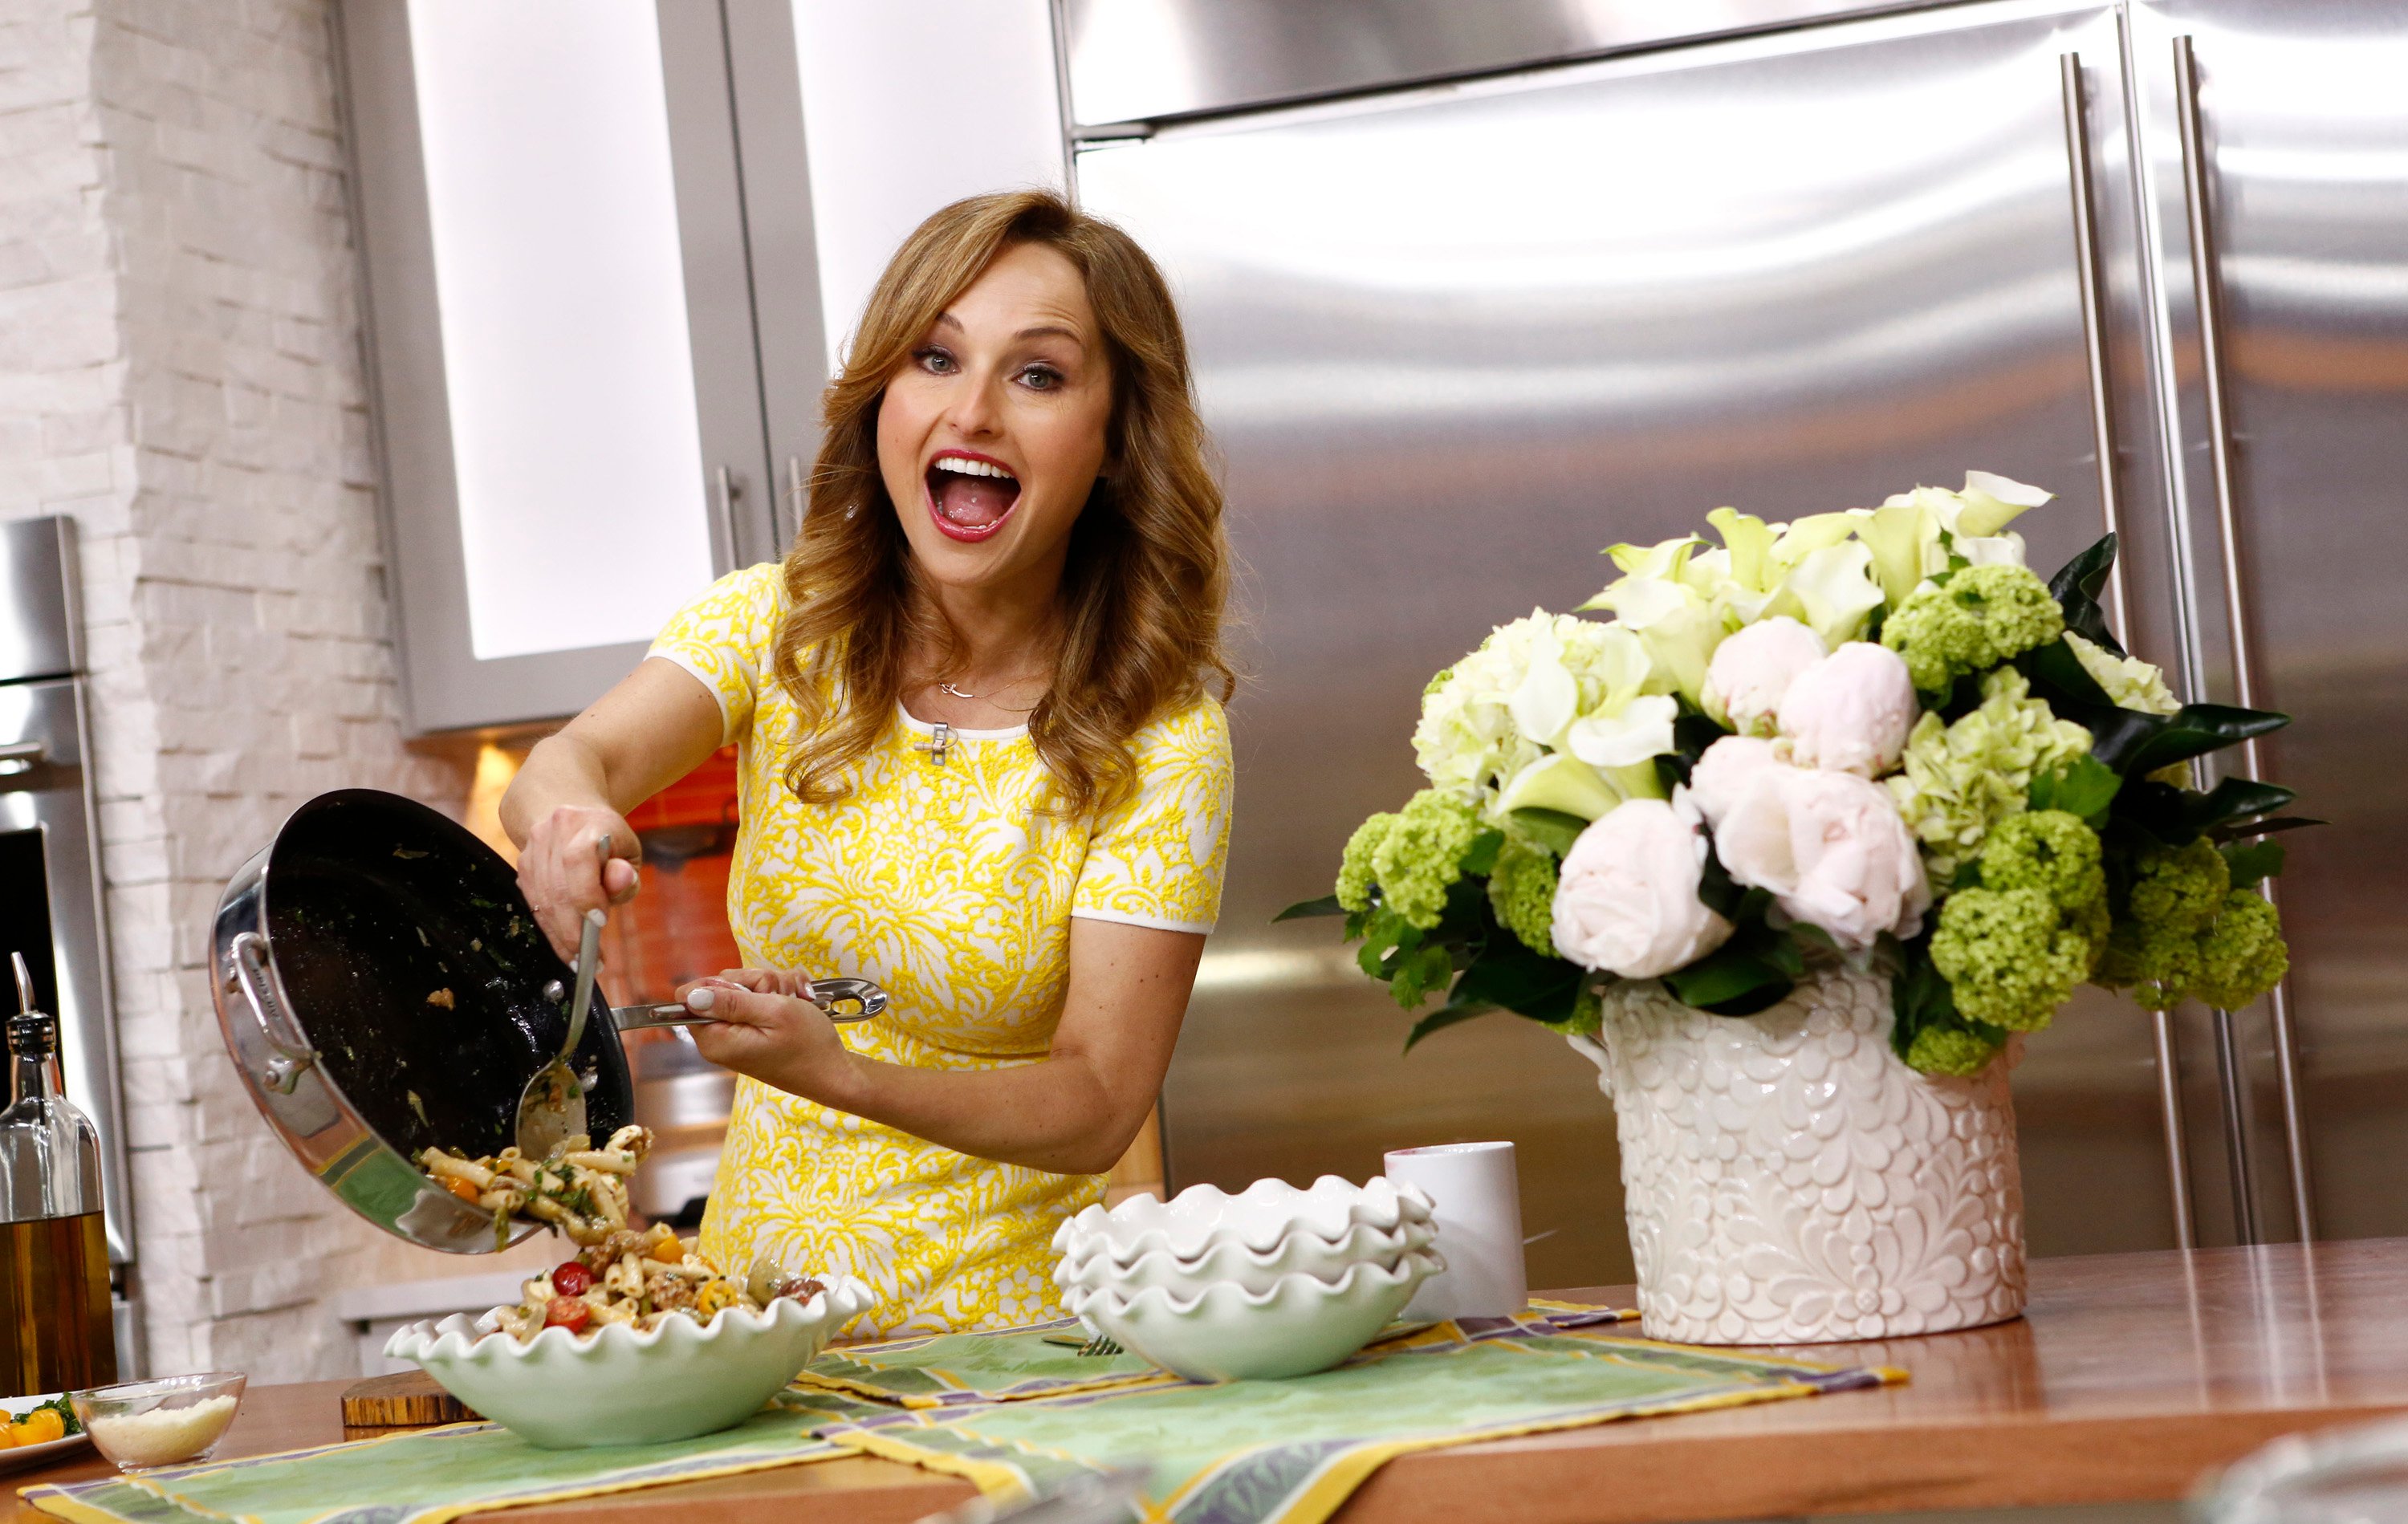 Giada De Laurentiis Proves Polenta Goes With Just About Any Meal